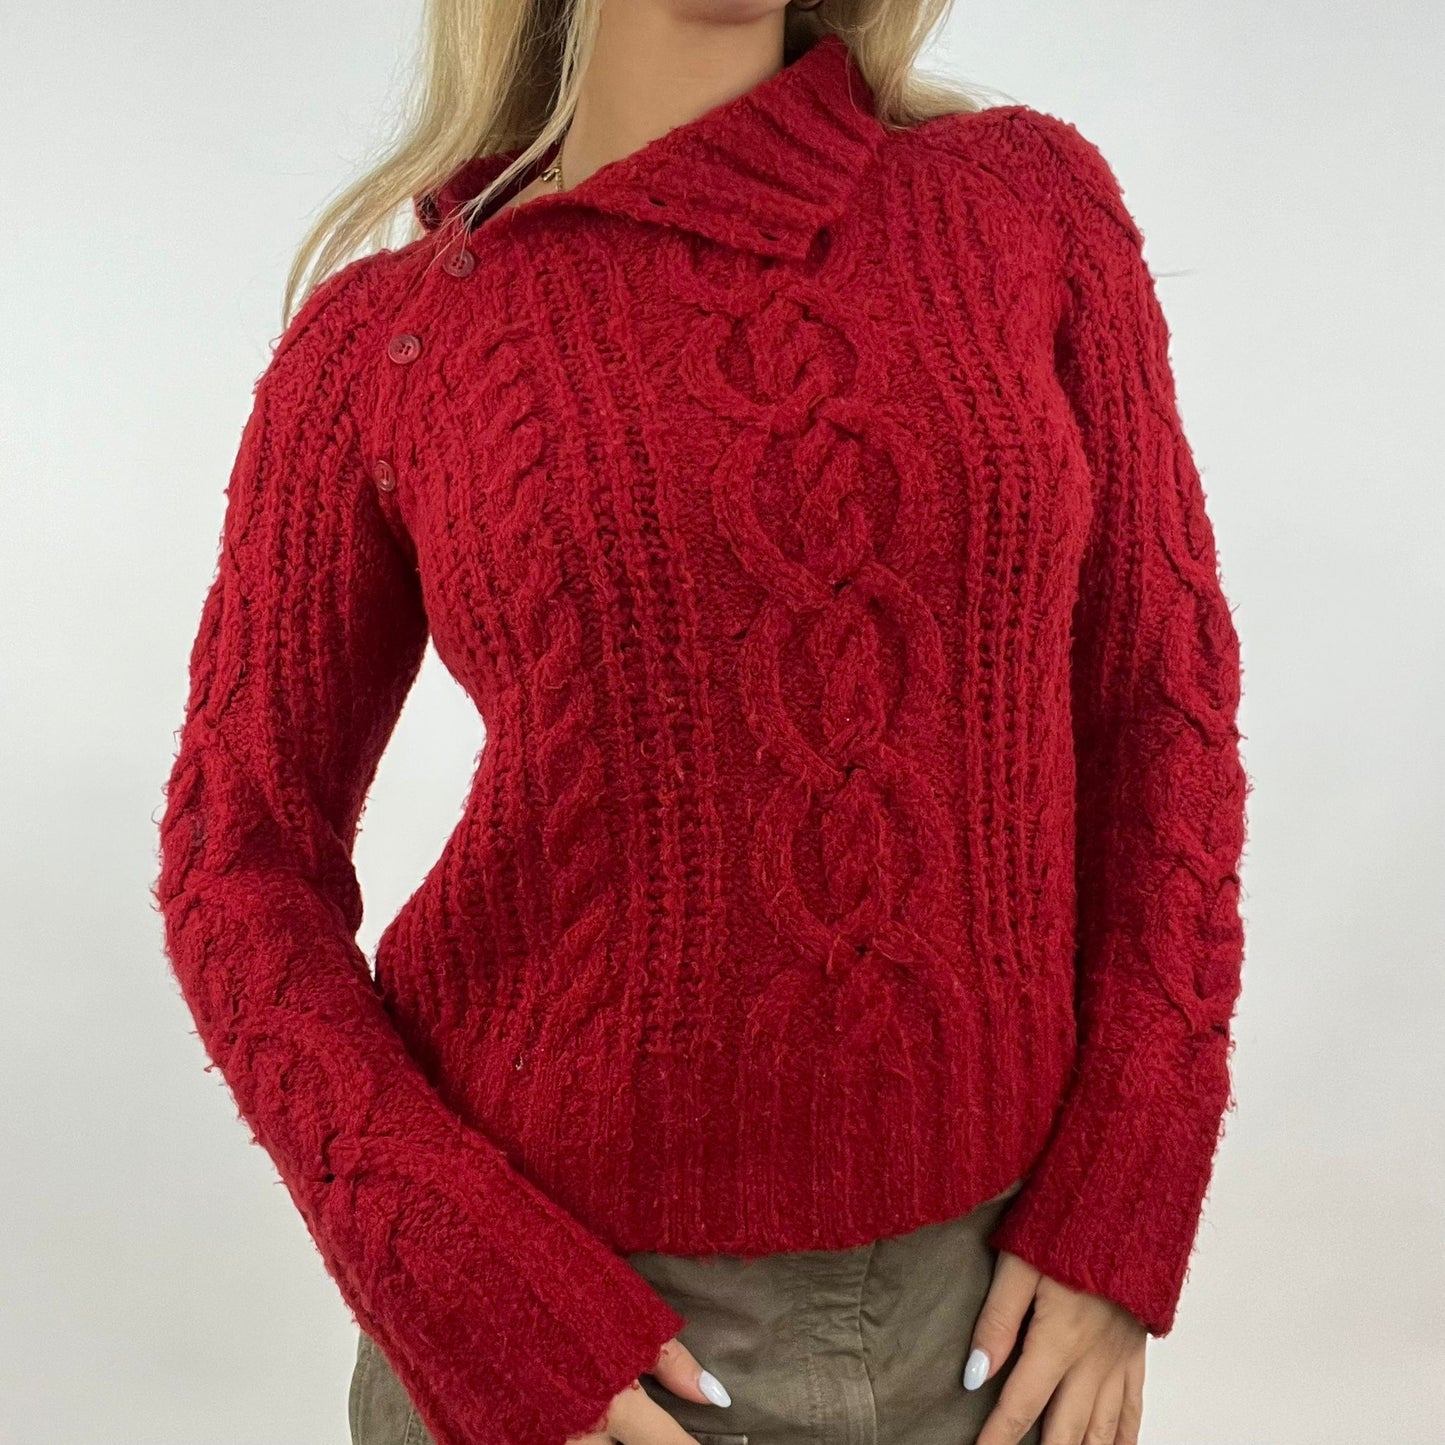 12 DAYS OF XMAS DROP | small red old label topshop knit roll neck jumper